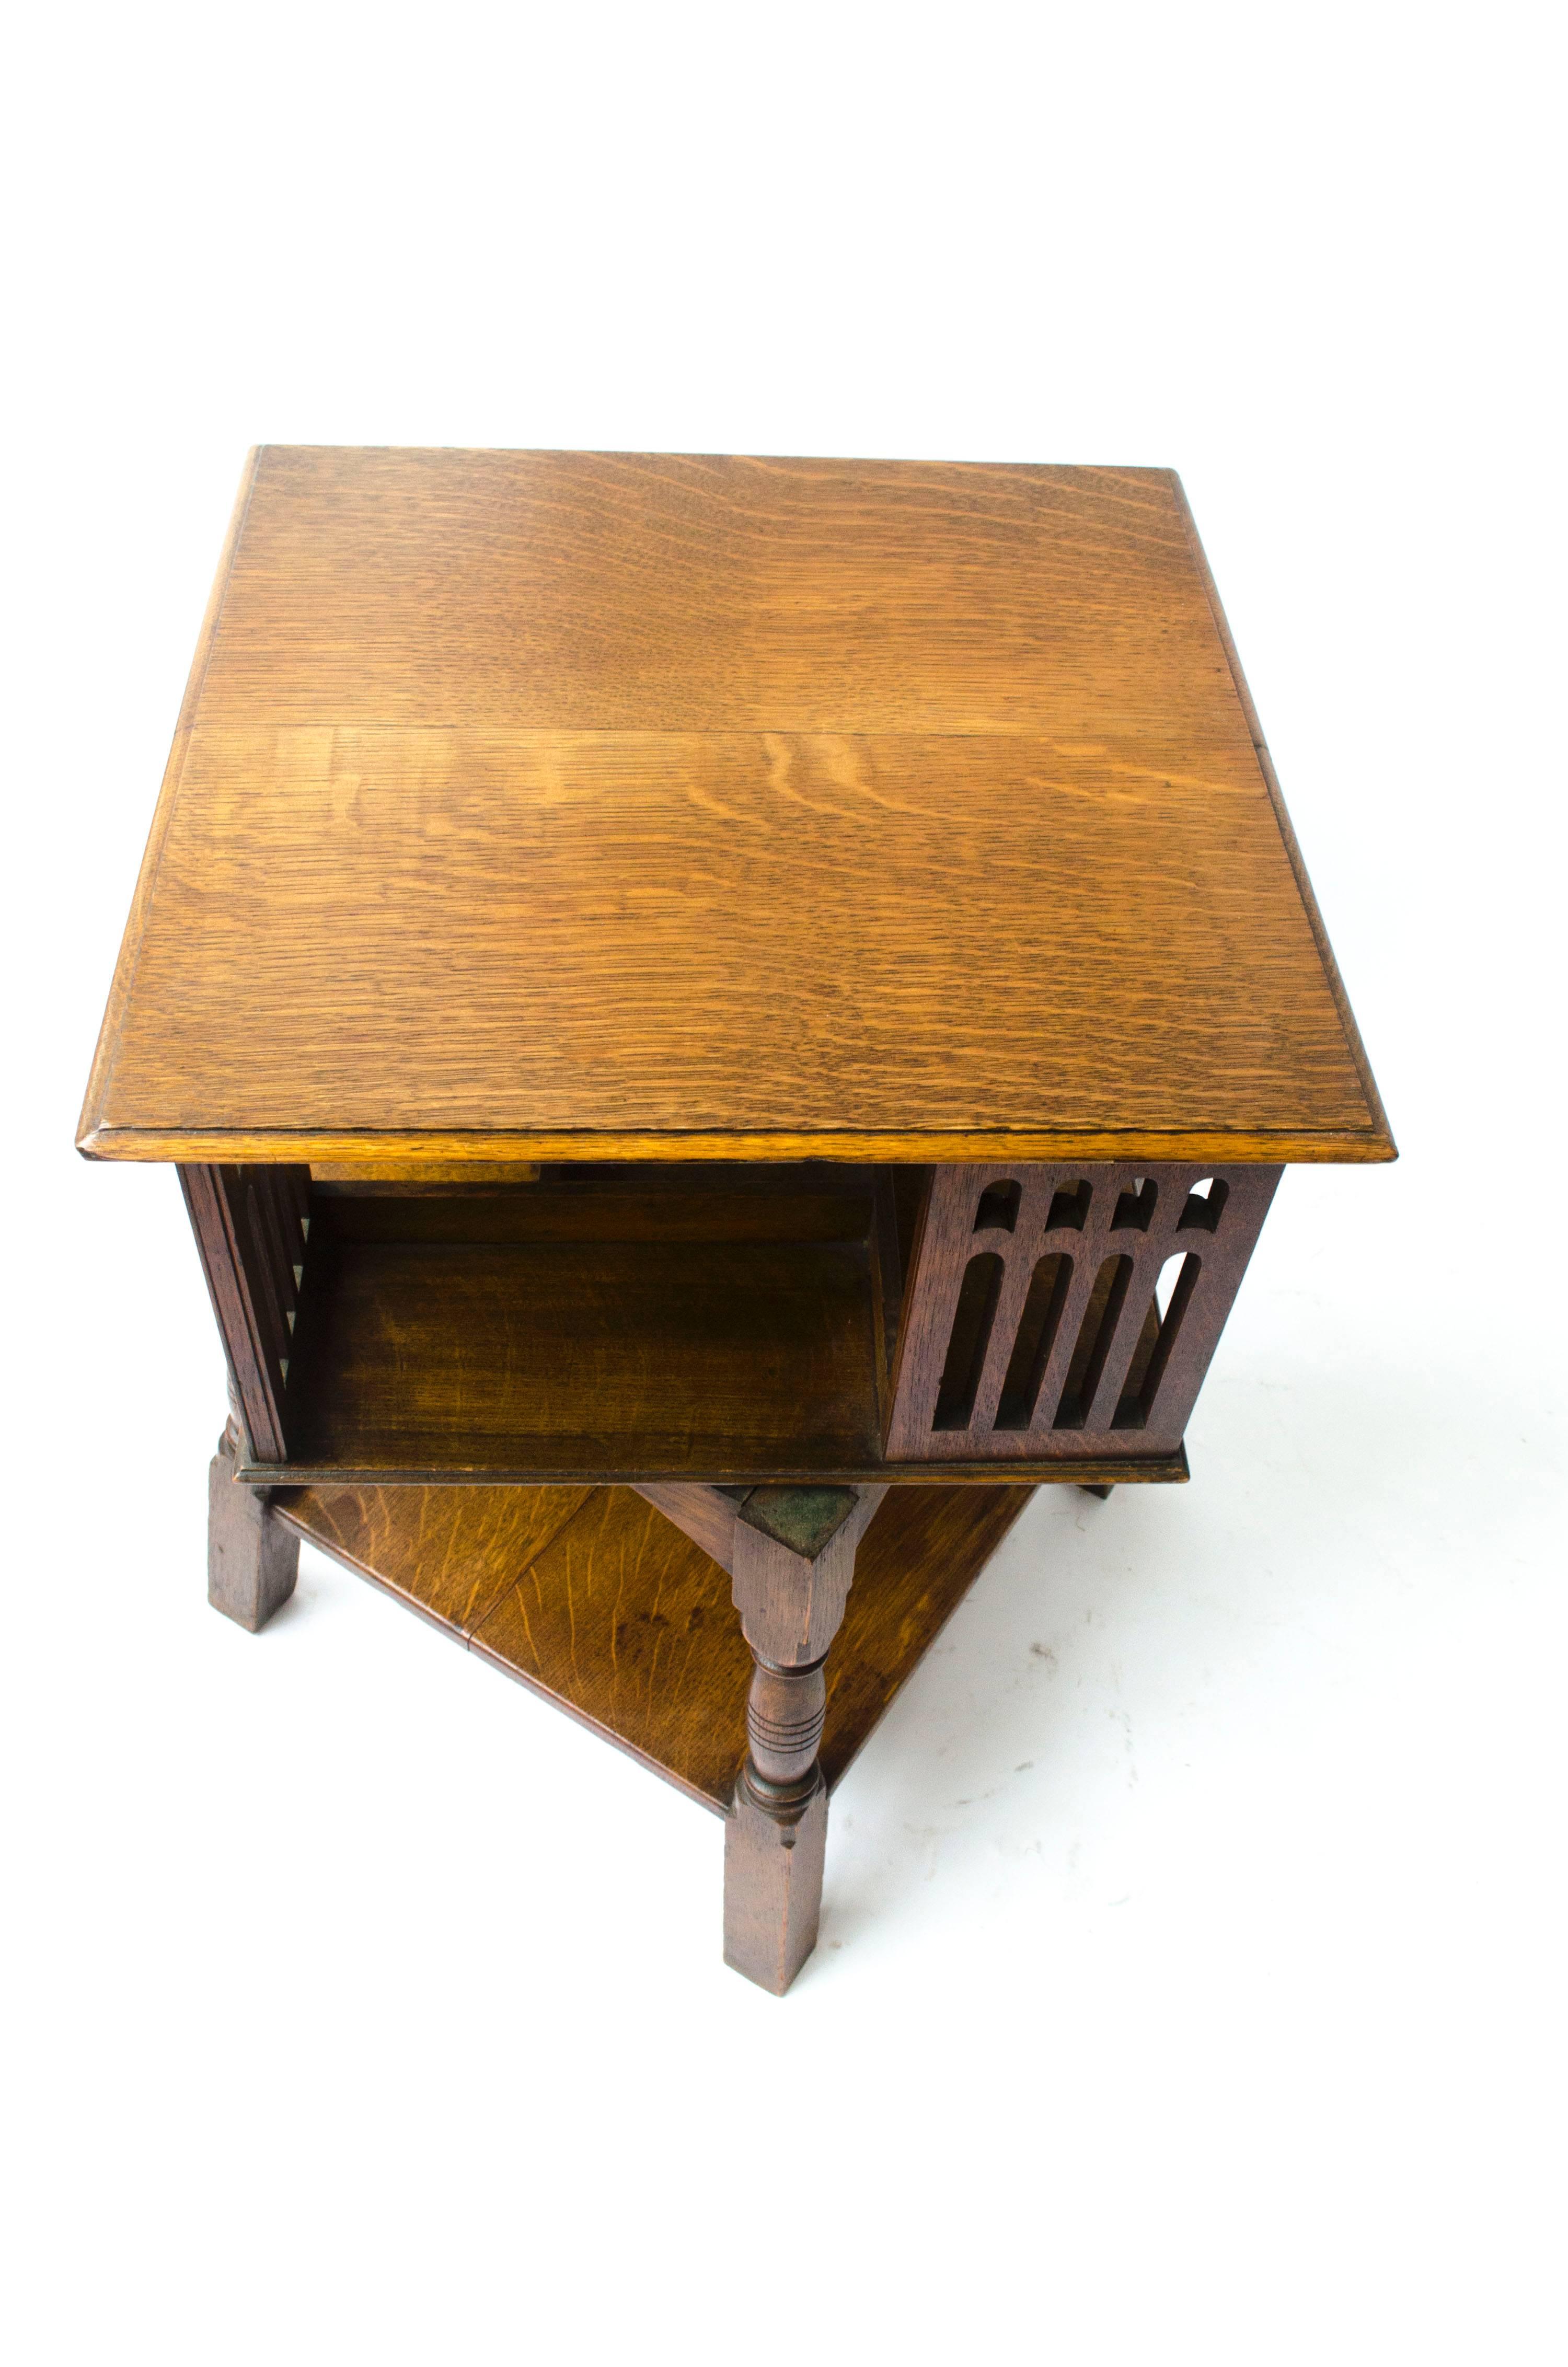 English Liberty & Co an Arts & Crafts Oak Revolving Bookcase Table on Square Turned Legs